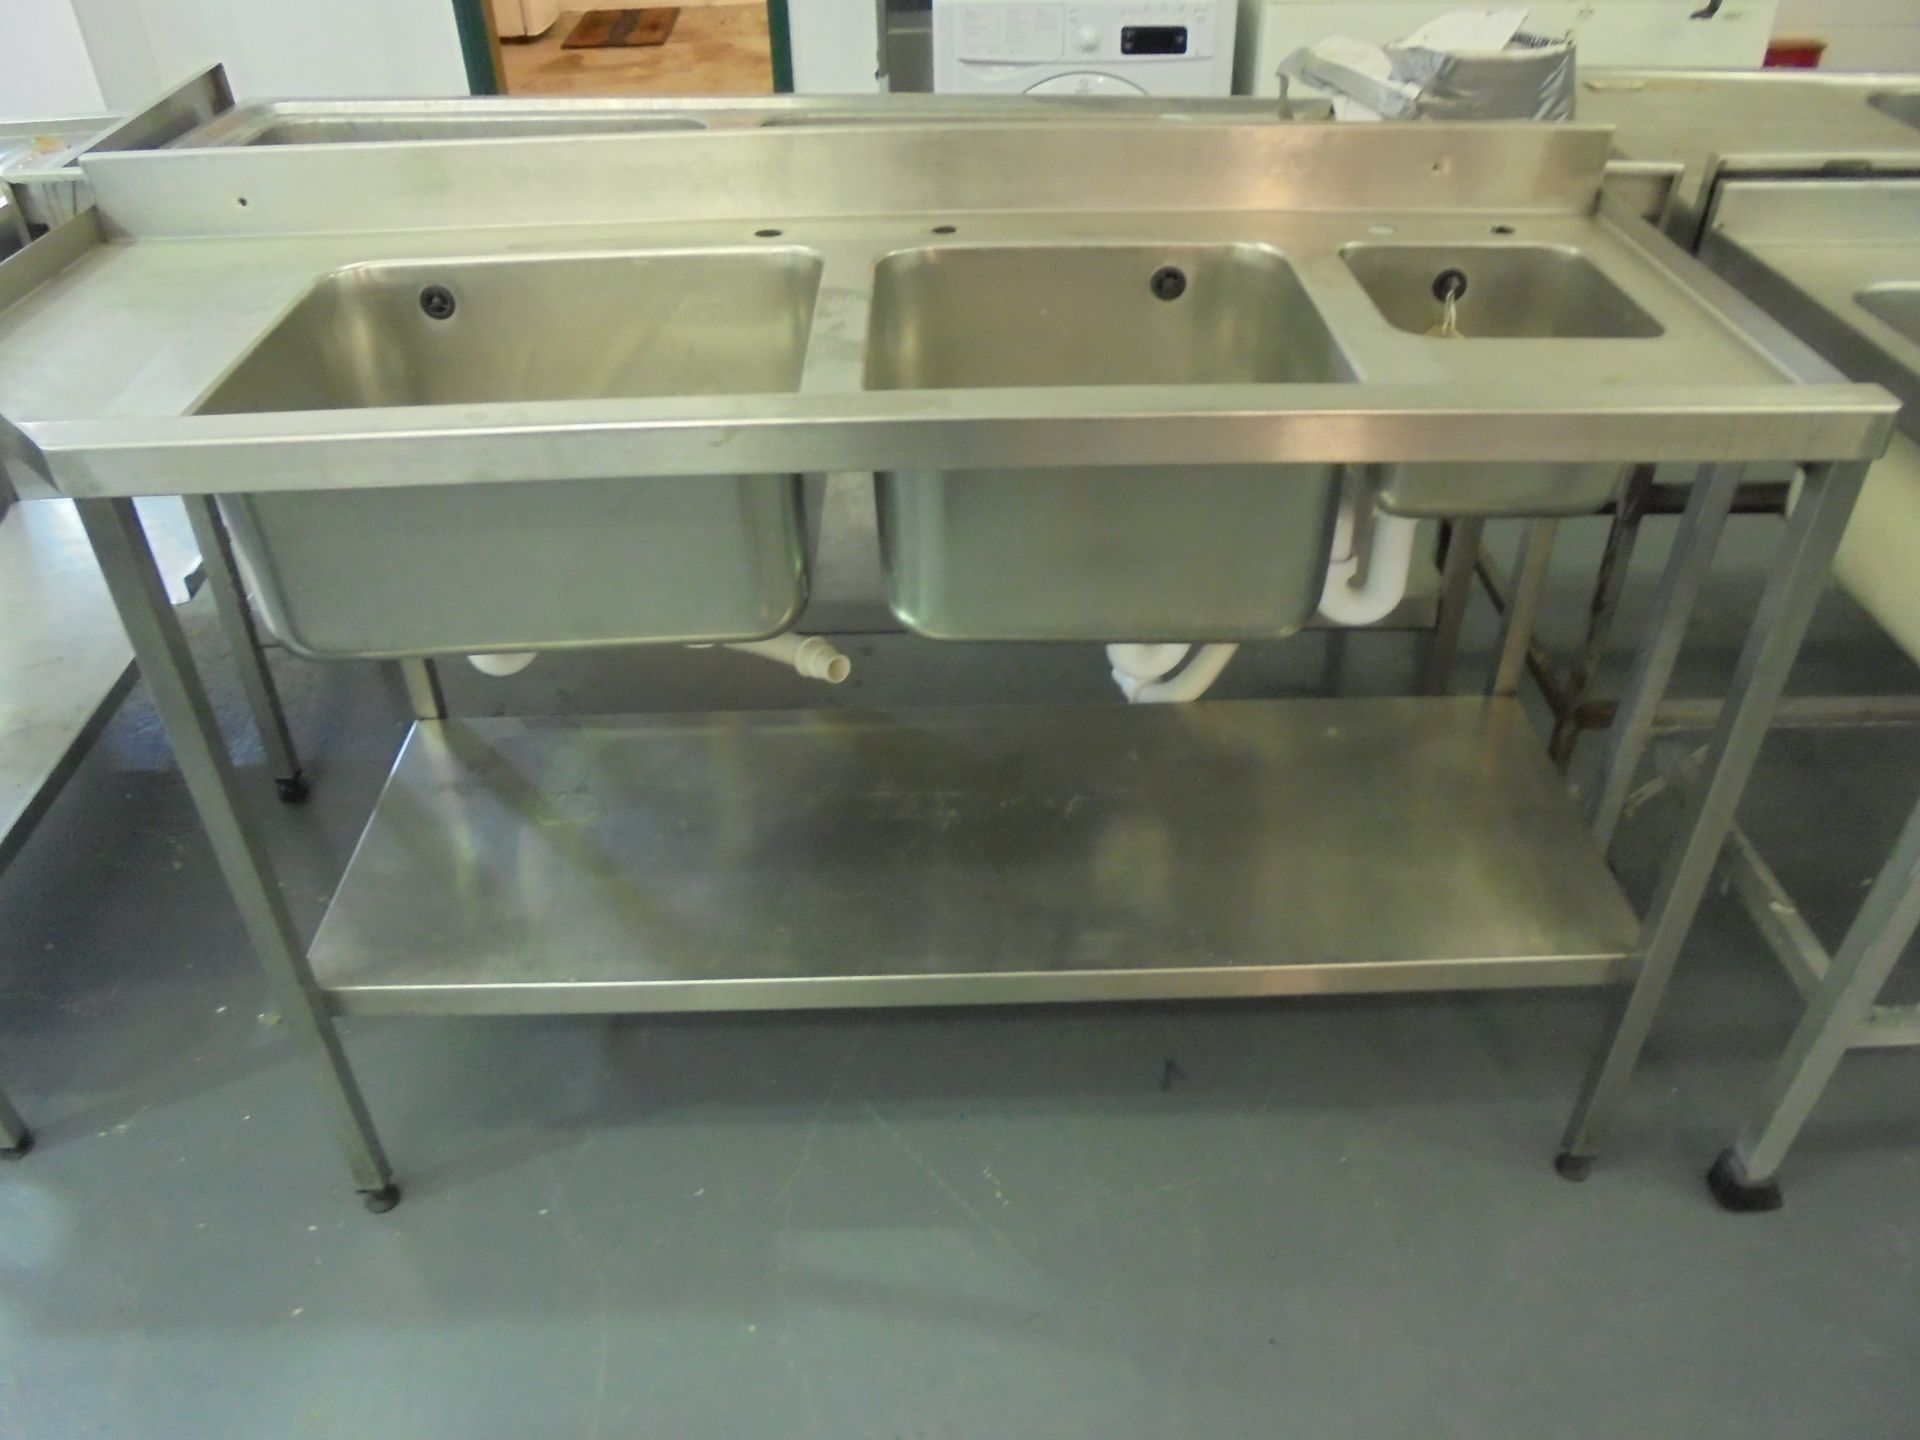 Stainless Steel Commercial Double Bowl Sink with Hand Basin & Shelf Under. Size (H) 90cm x (D) - Image 2 of 3